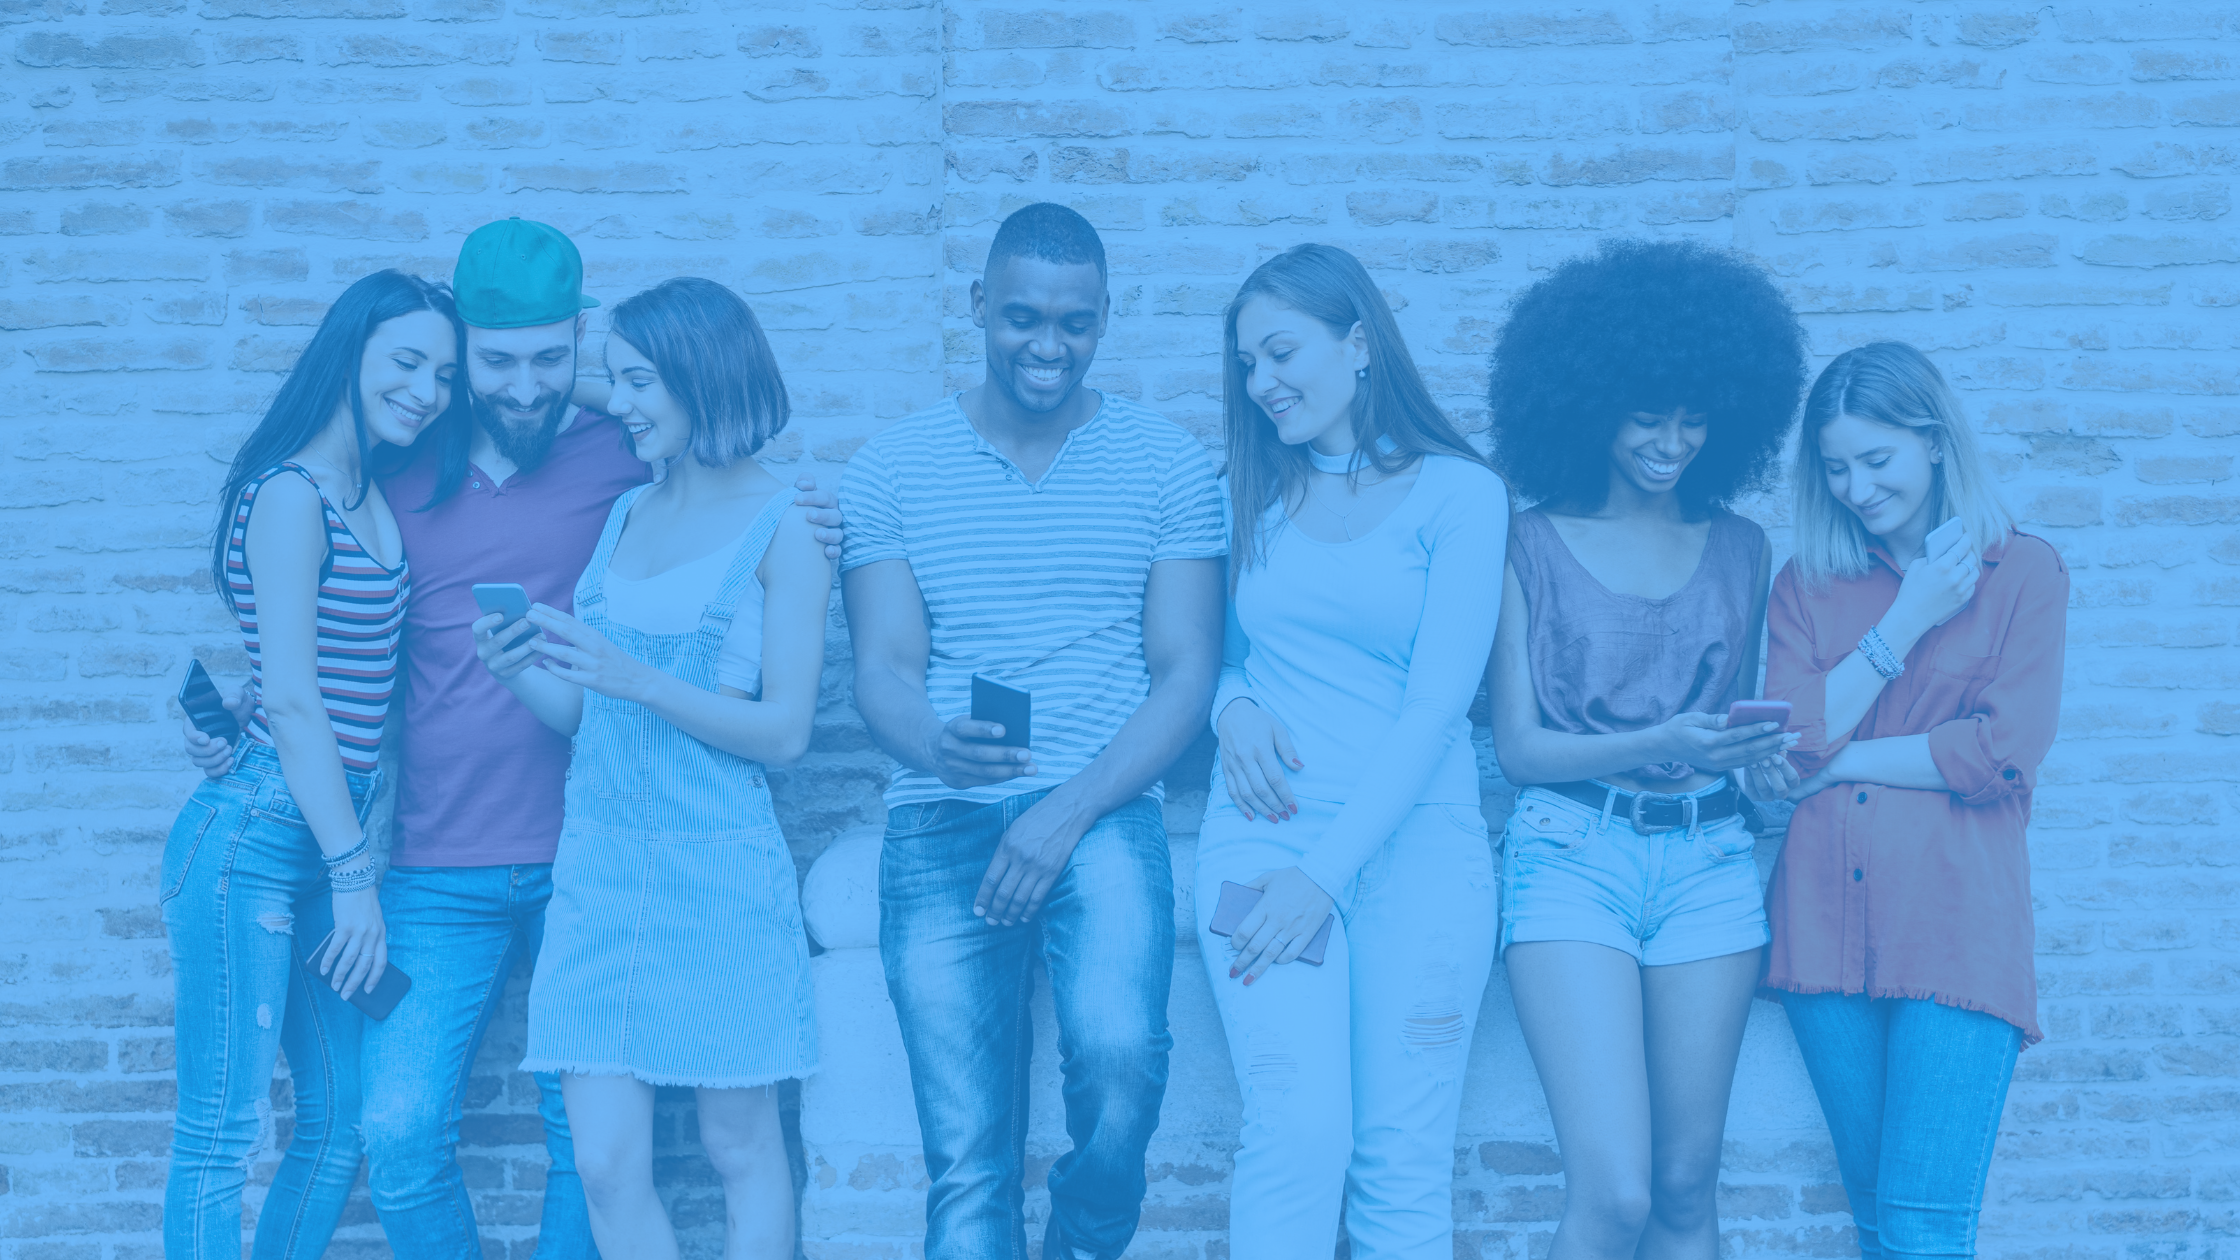 3 Tips for Publishers Looking to Engage Gen Z